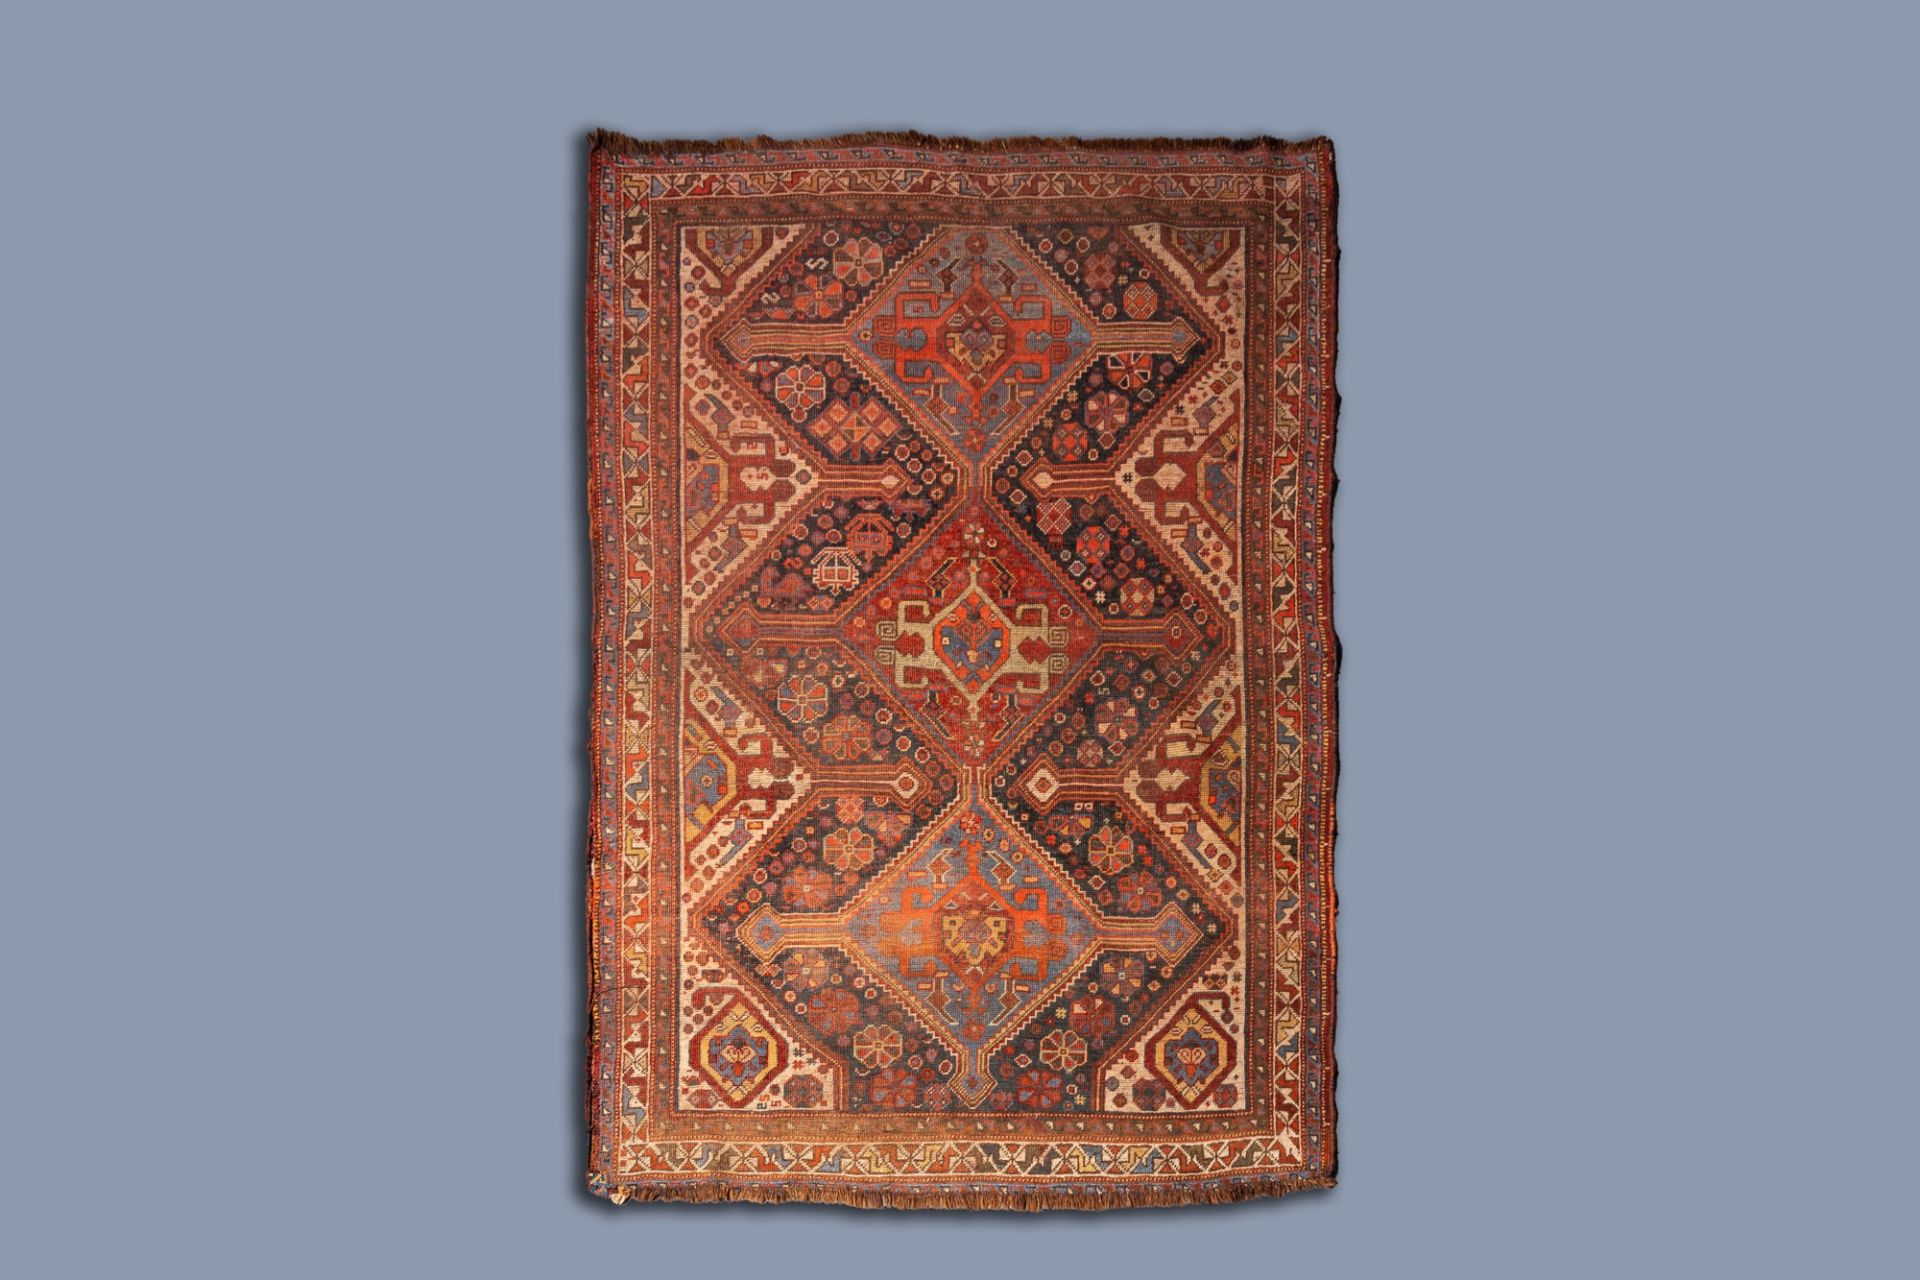 A Caucasian rug with geometric patterns and floral design, wool on cotton, 19th C.